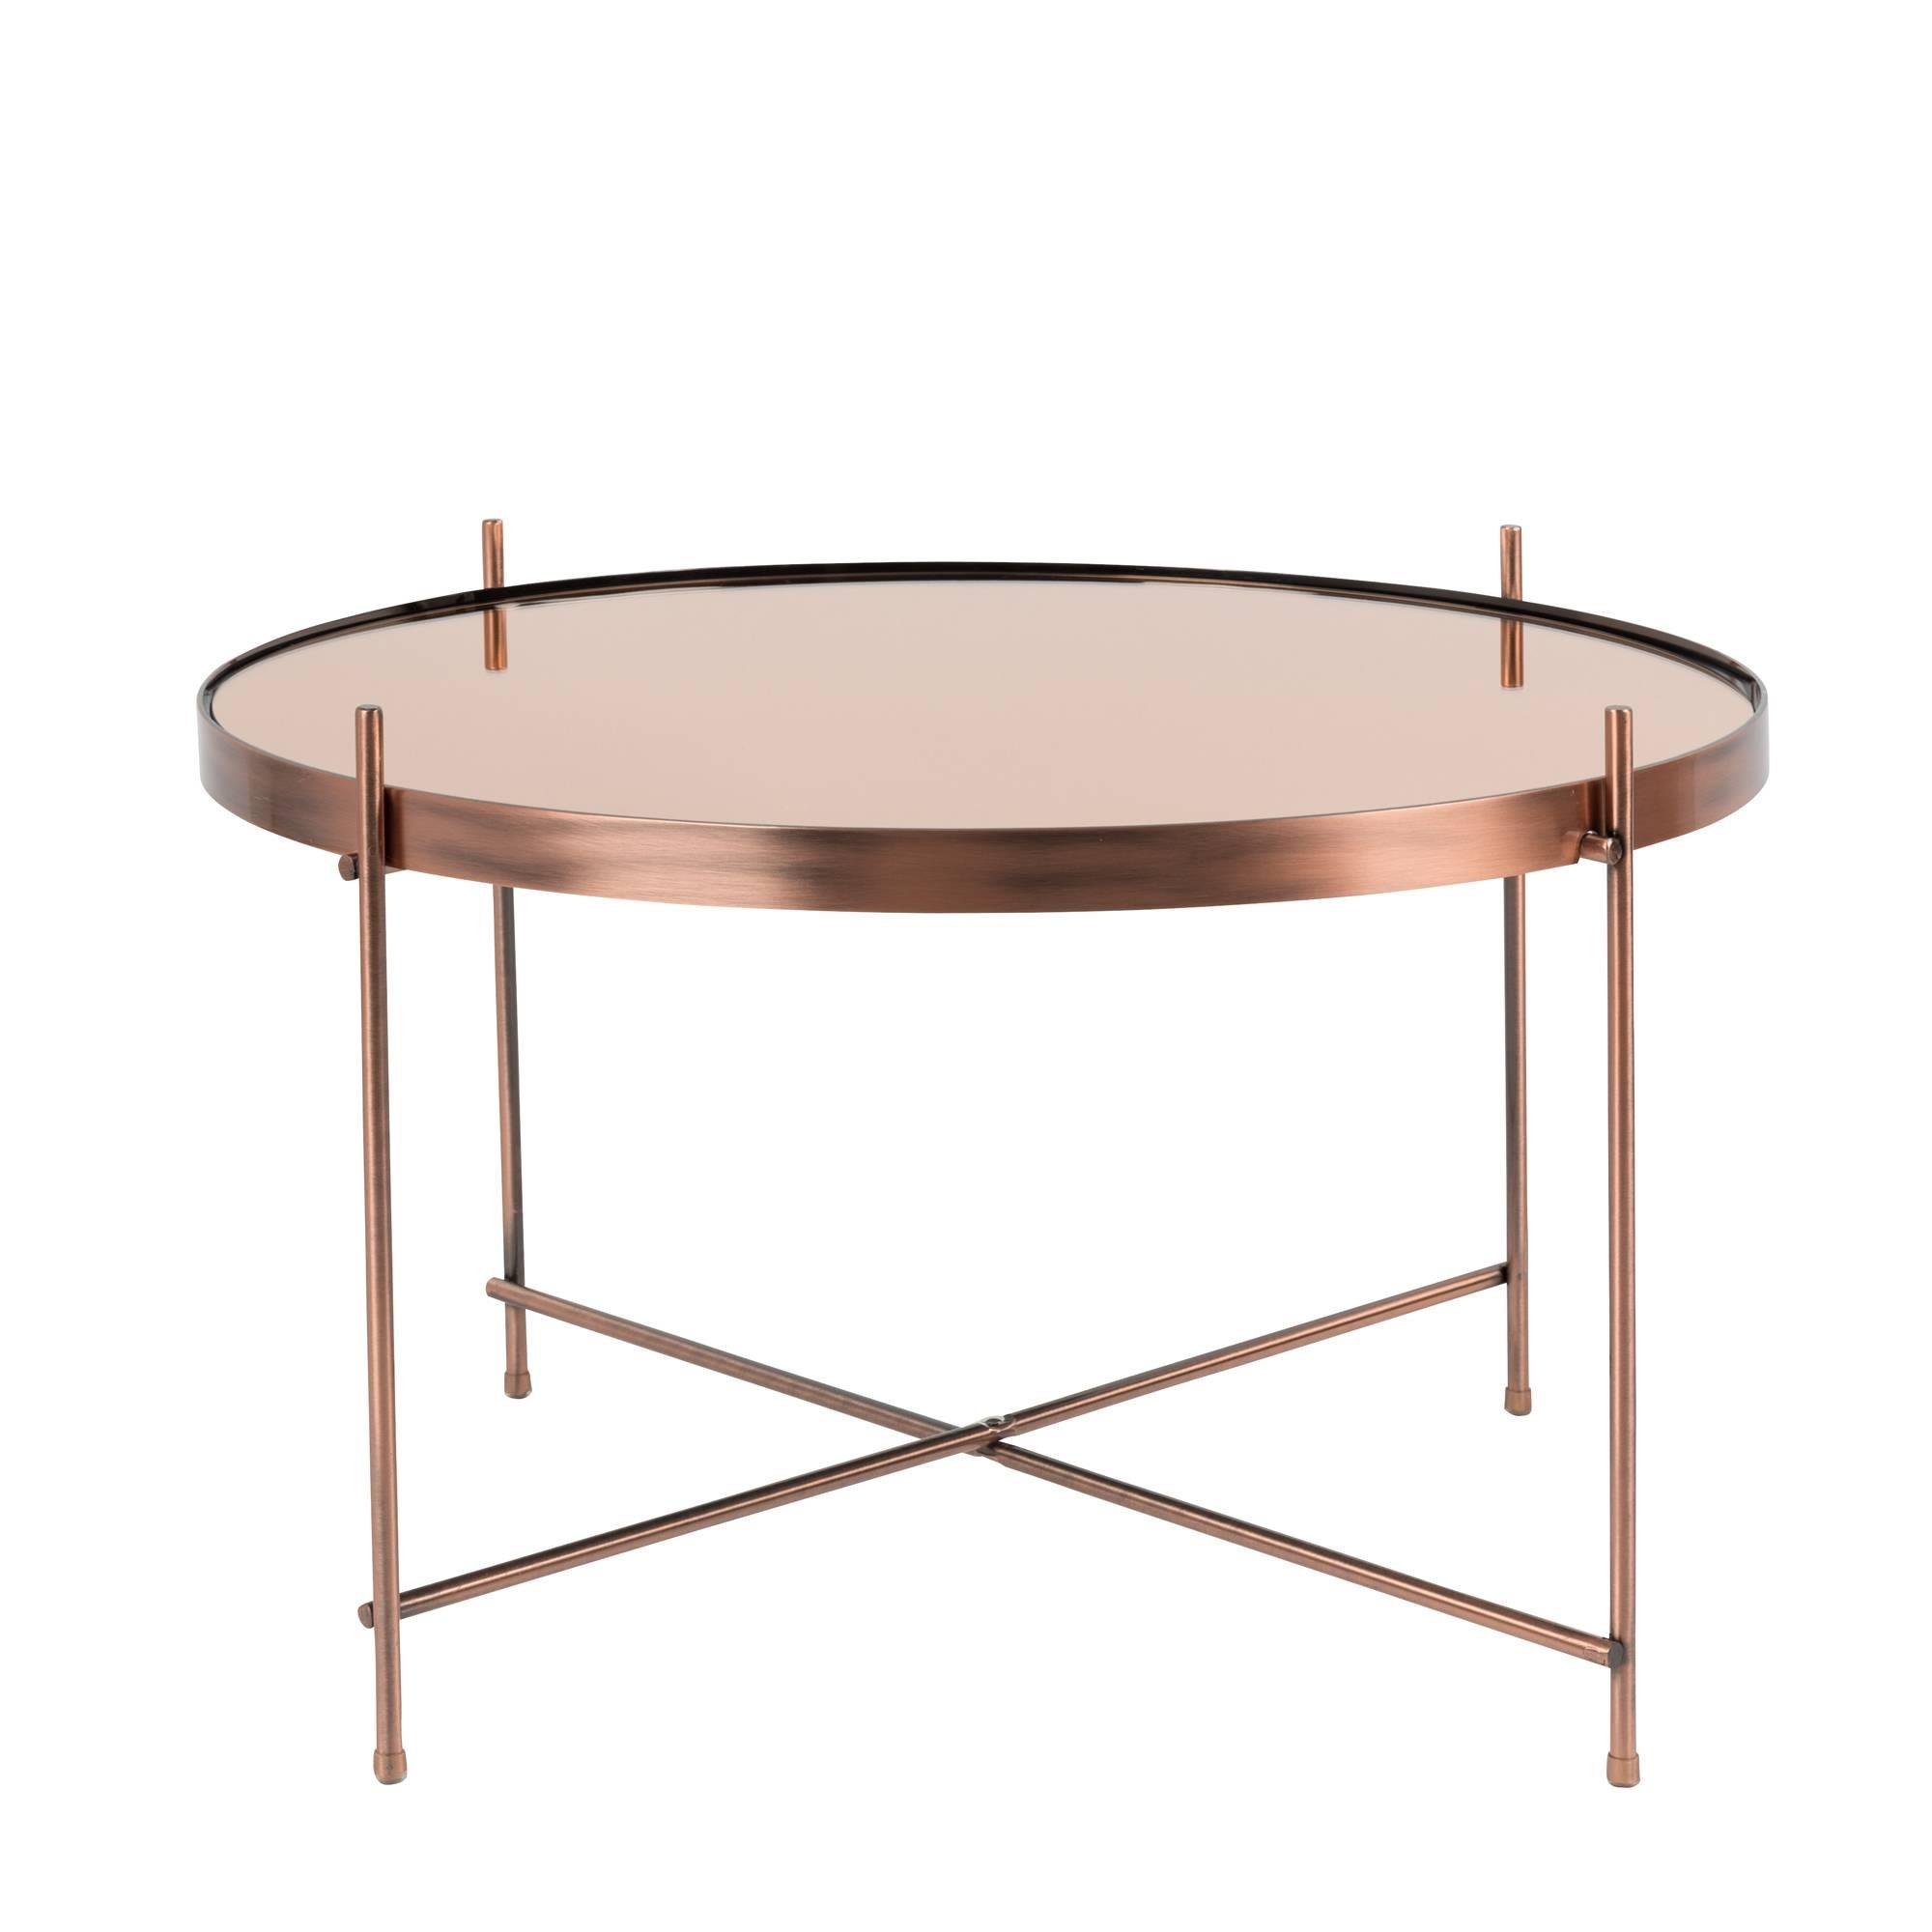 Coffee Table Prague Round Brushed Copper  D800 x H450mm